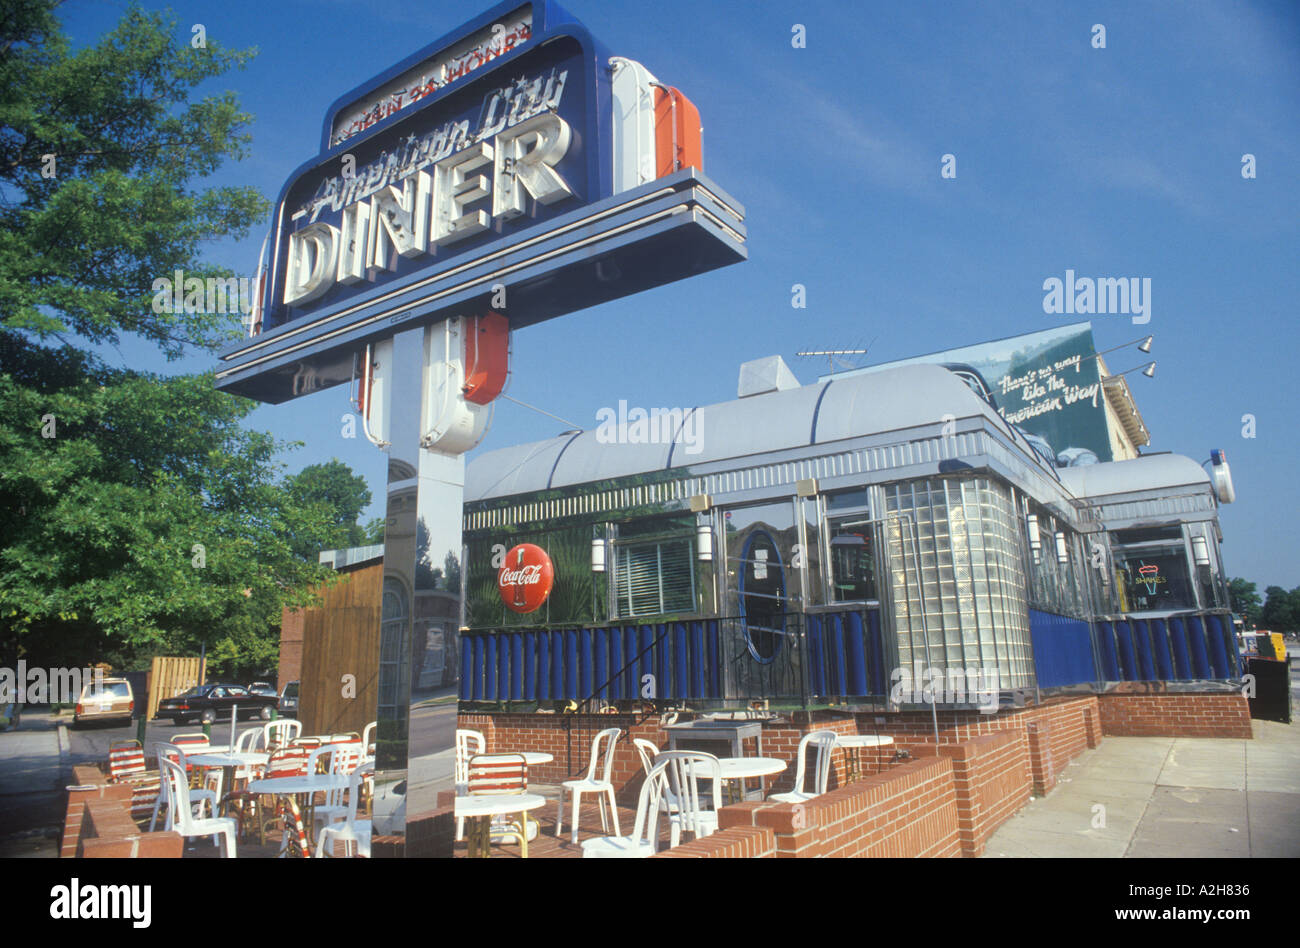 Retro style outside diner and burger stand 2002 Stock Photo